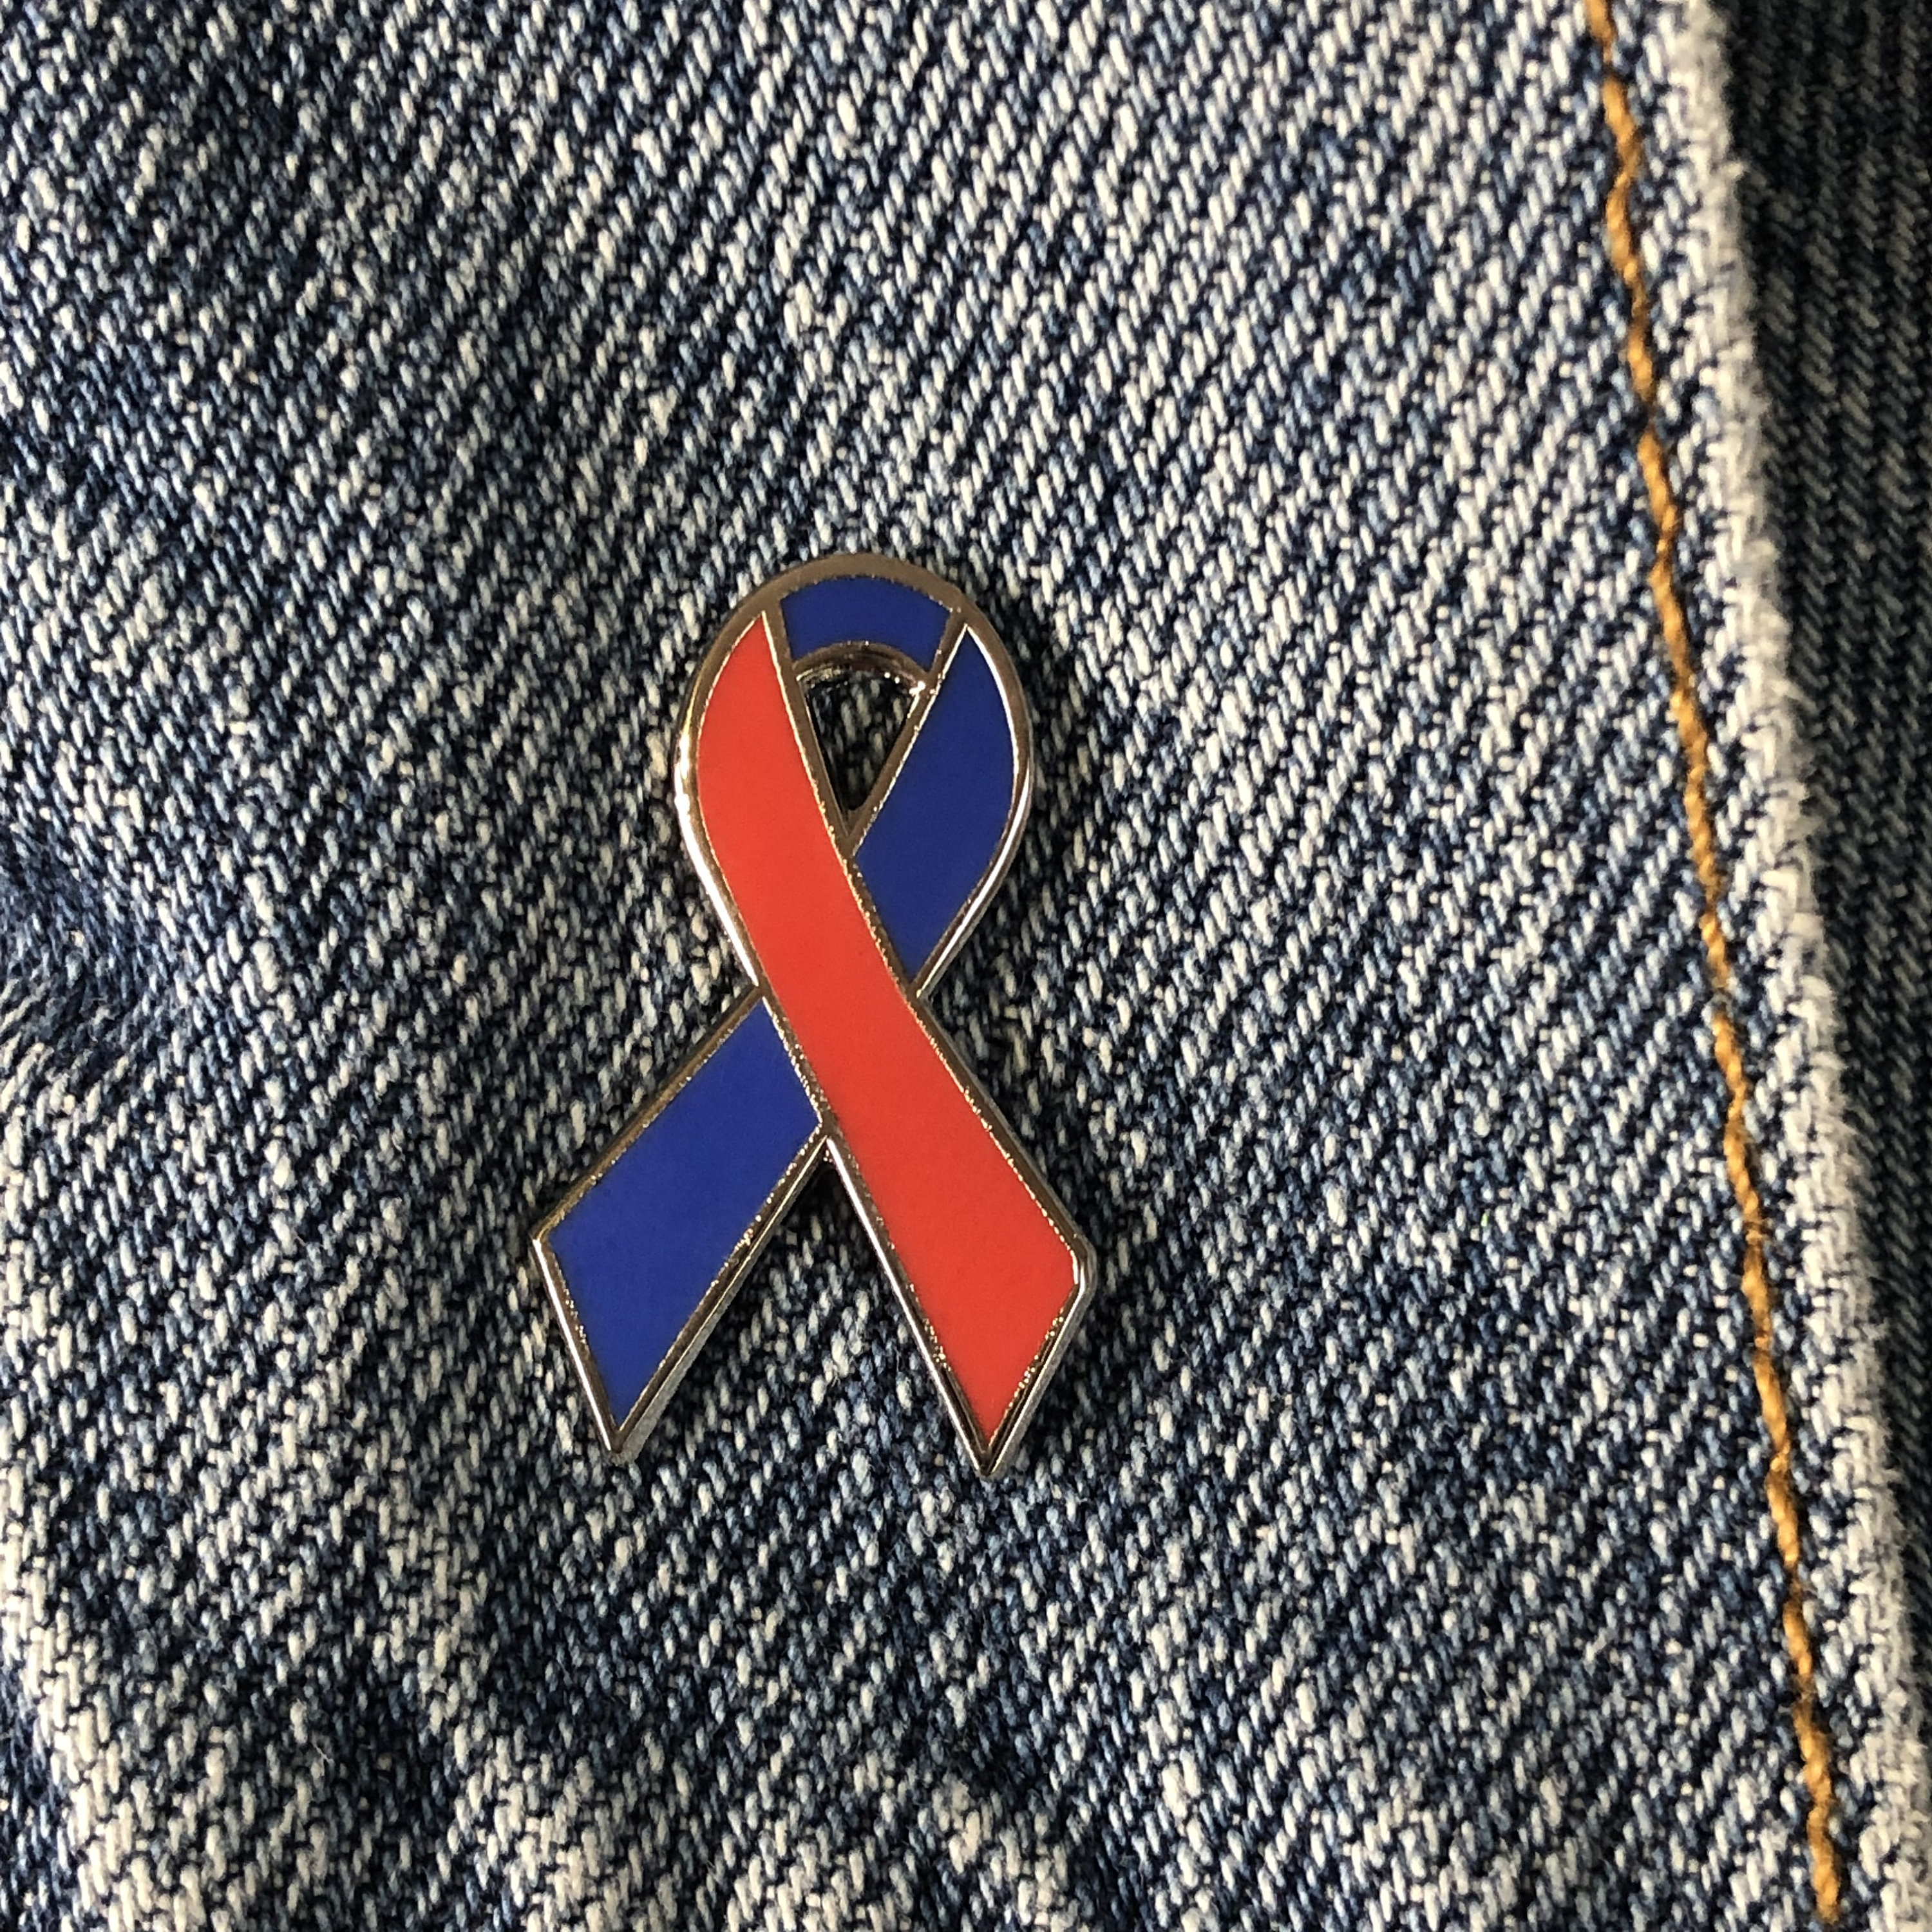 1 Pin - Retail Congenital Heart Defects Awareness Red & Blue Lapel Pin in a Bag